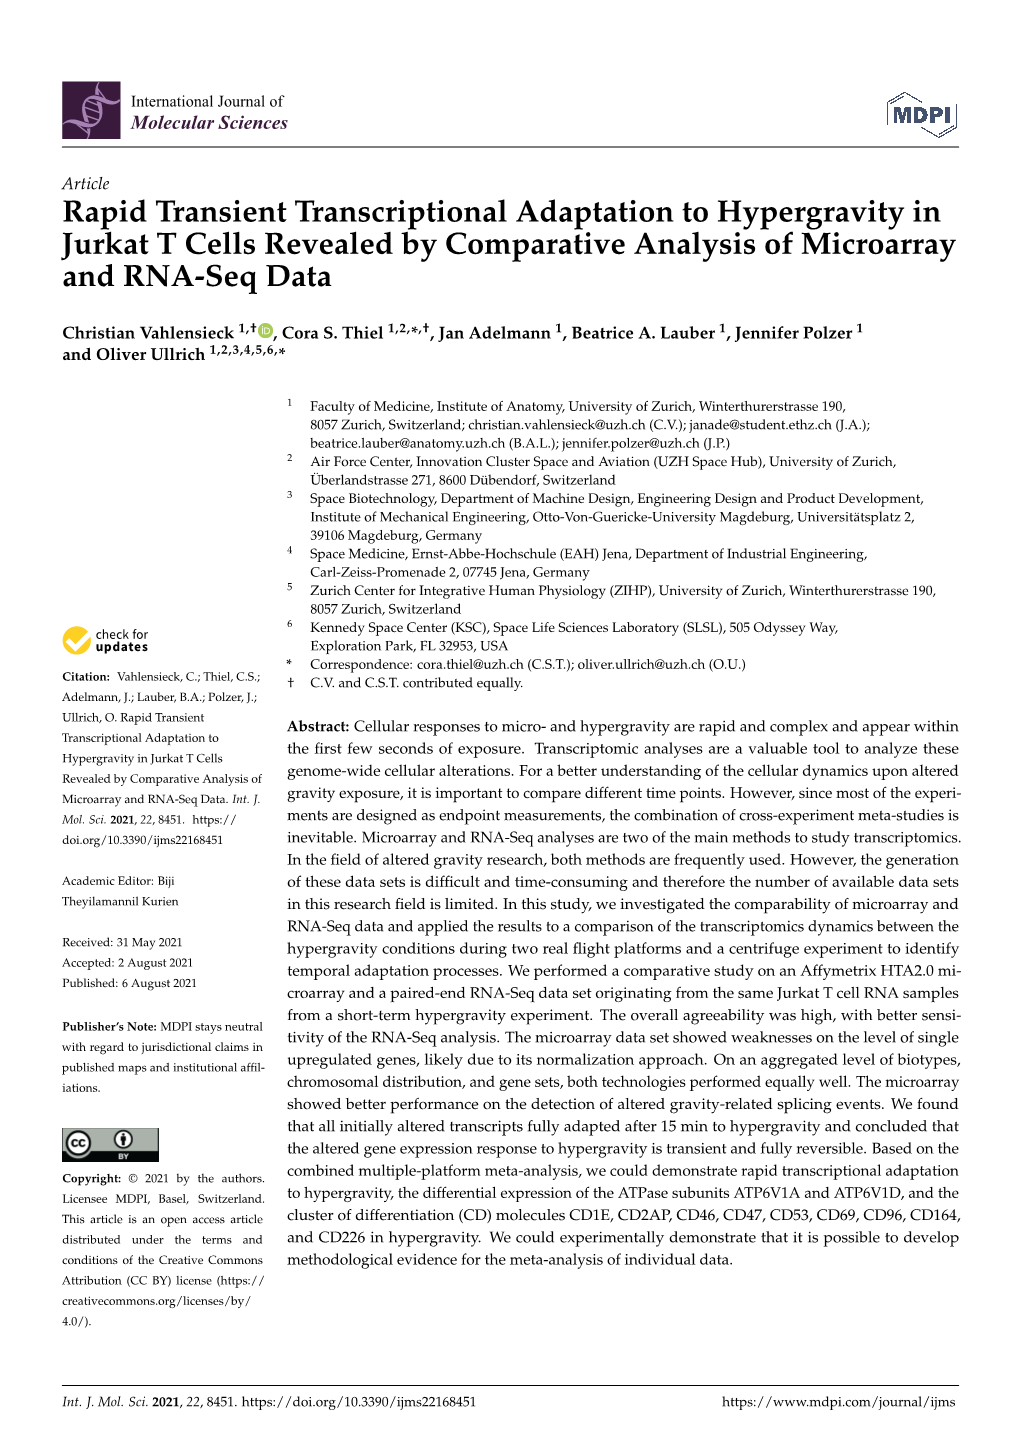 Rapid Transient Transcriptional Adaptation to Hypergravity in Jurkat T Cells Revealed by Comparative Analysis of Microarray and RNA-Seq Data